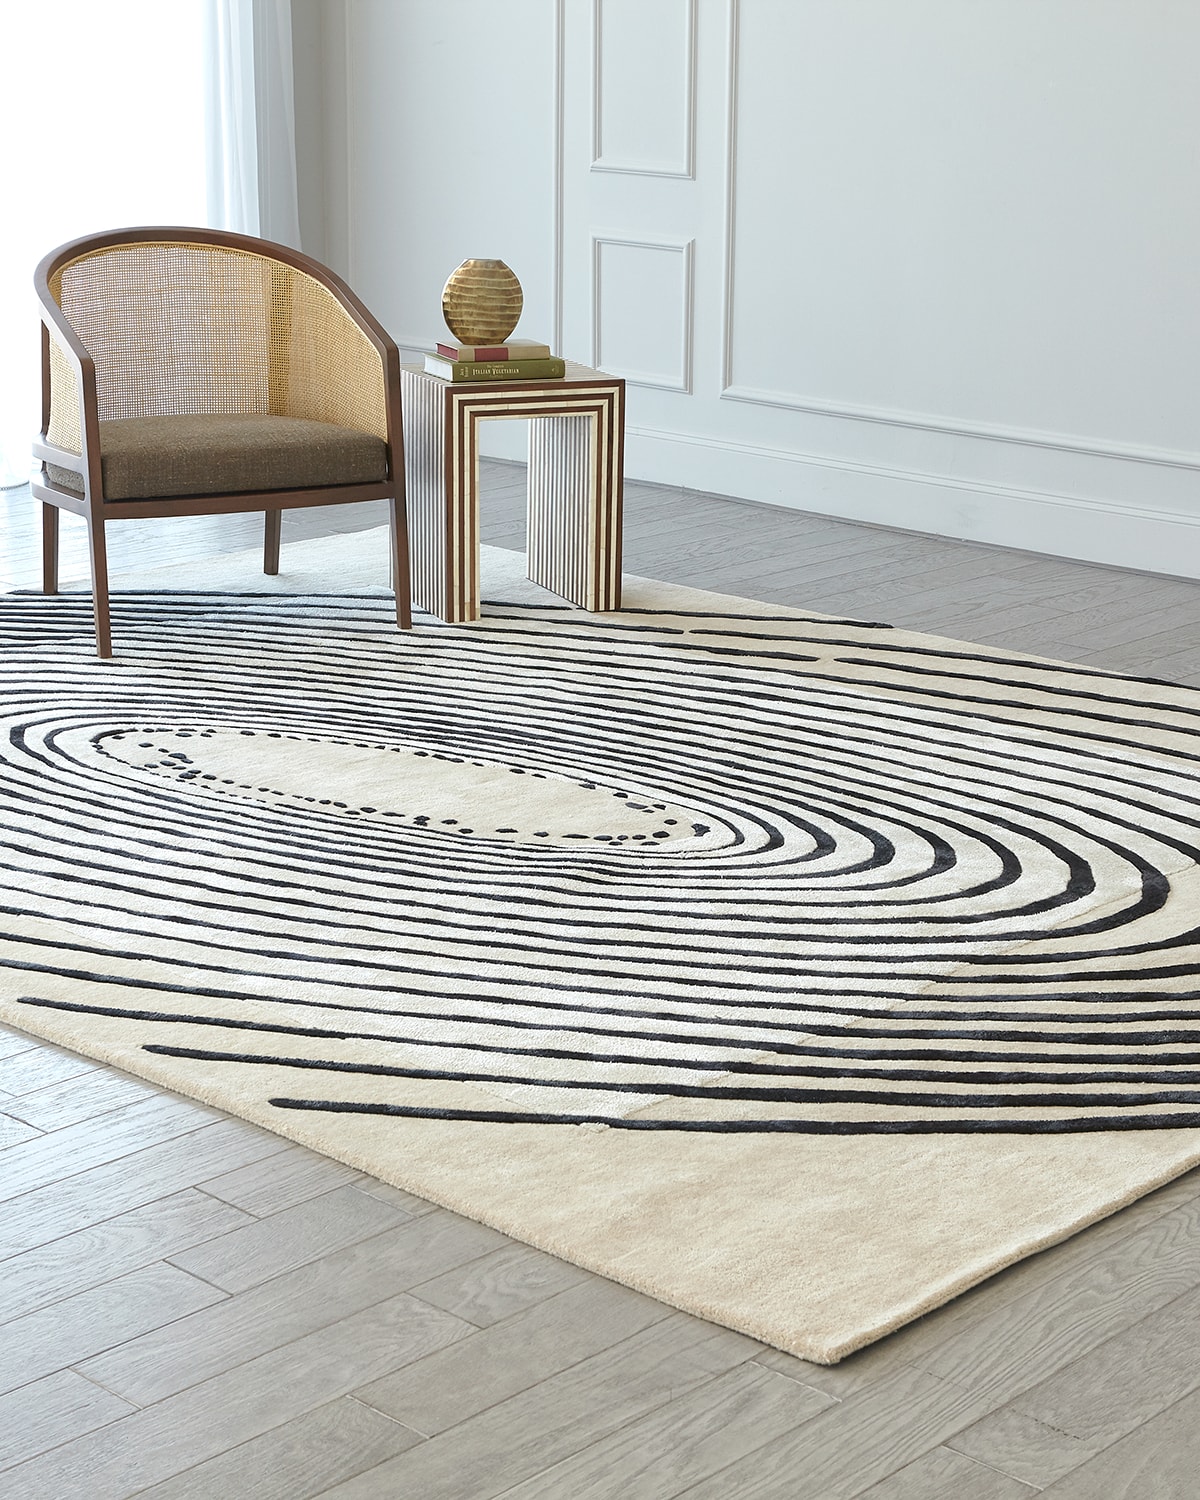 Concentric Circles Hand-Tufted Rug, 8' x 10'